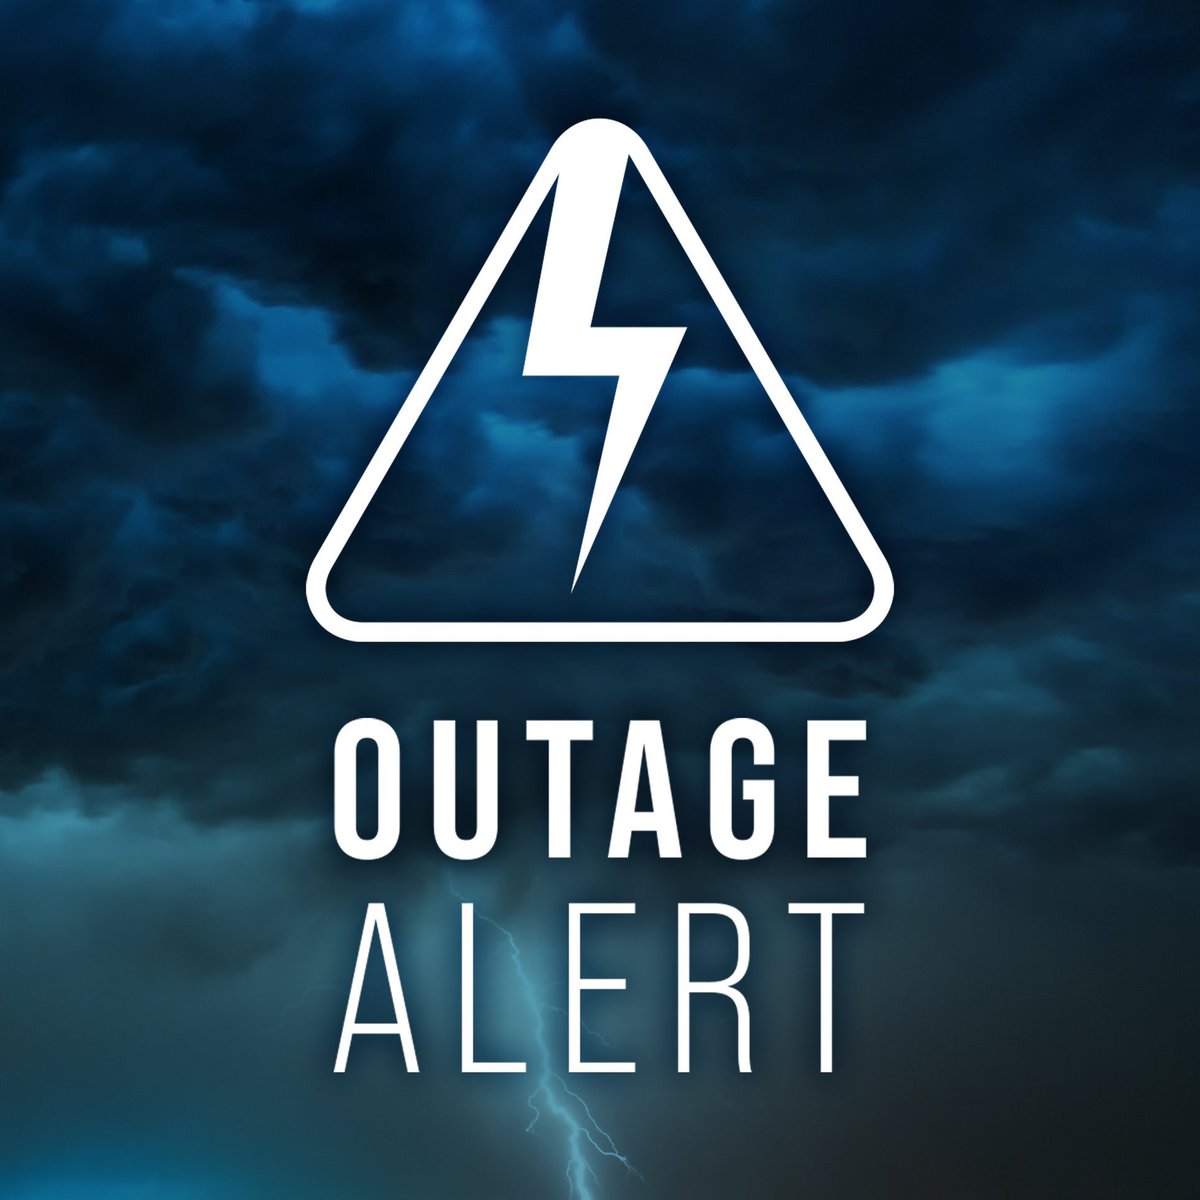 Outage Alert 8:50pm - We are experiencing multiple outages throughout our service area. Crews are working as quickly and safely as possible. A reminder that you can report and track power outages…